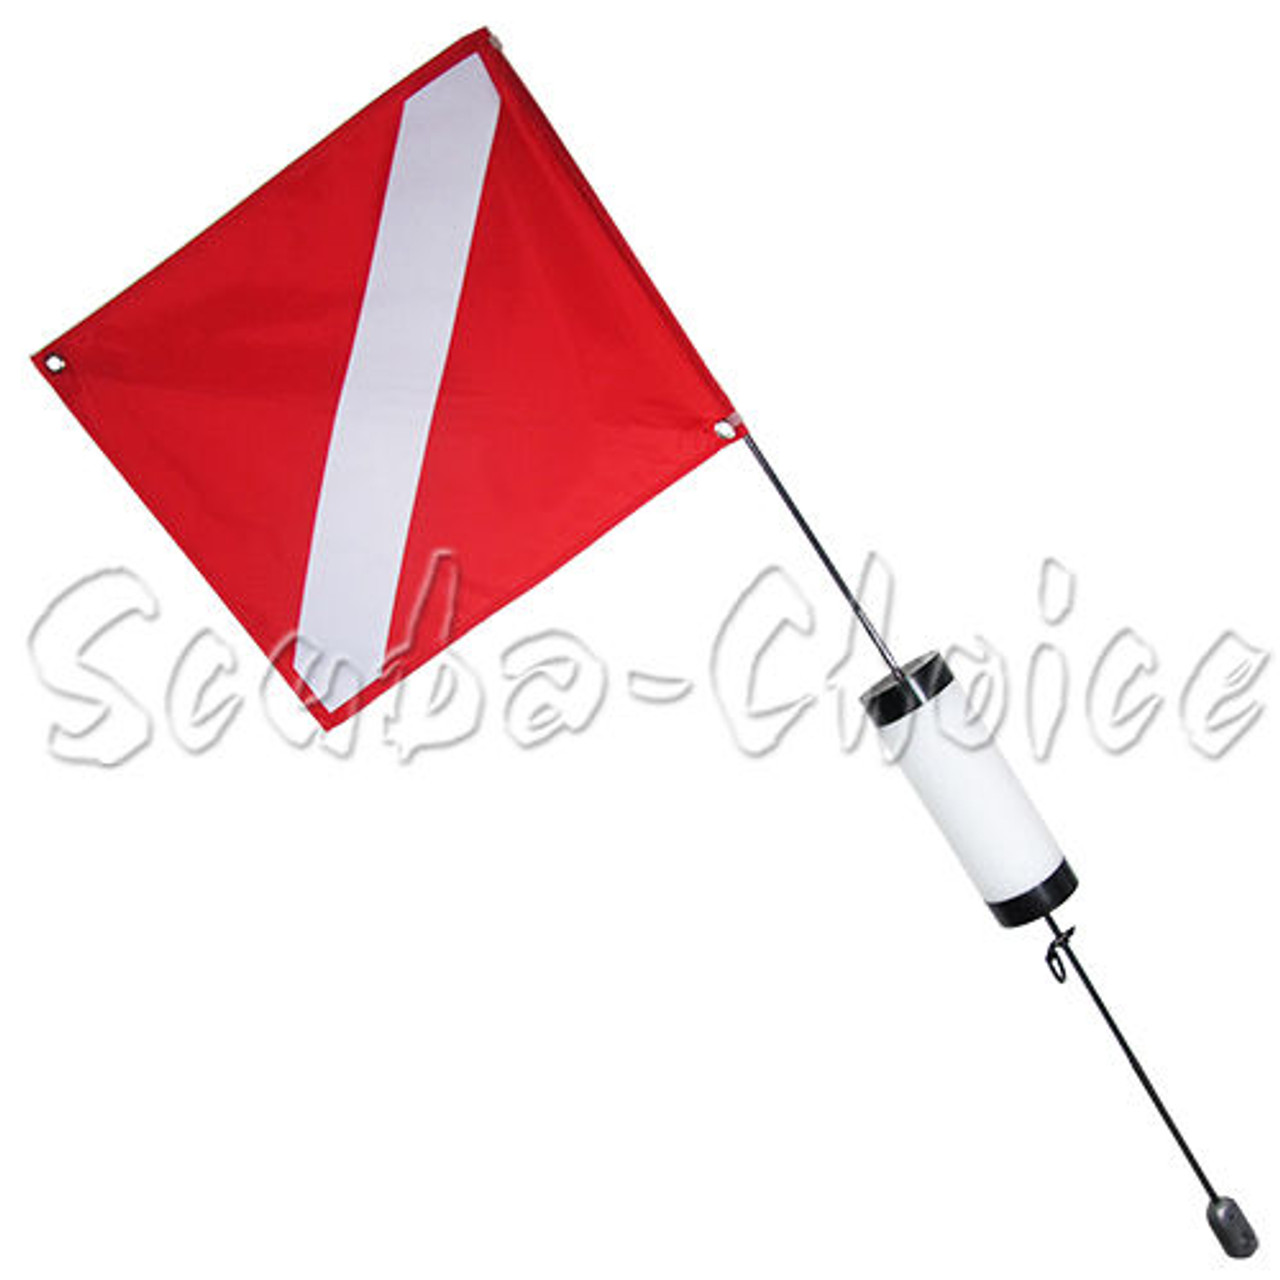 Scuba Choice Scuba Diving Spearfishing Free Dive Flag with Weight